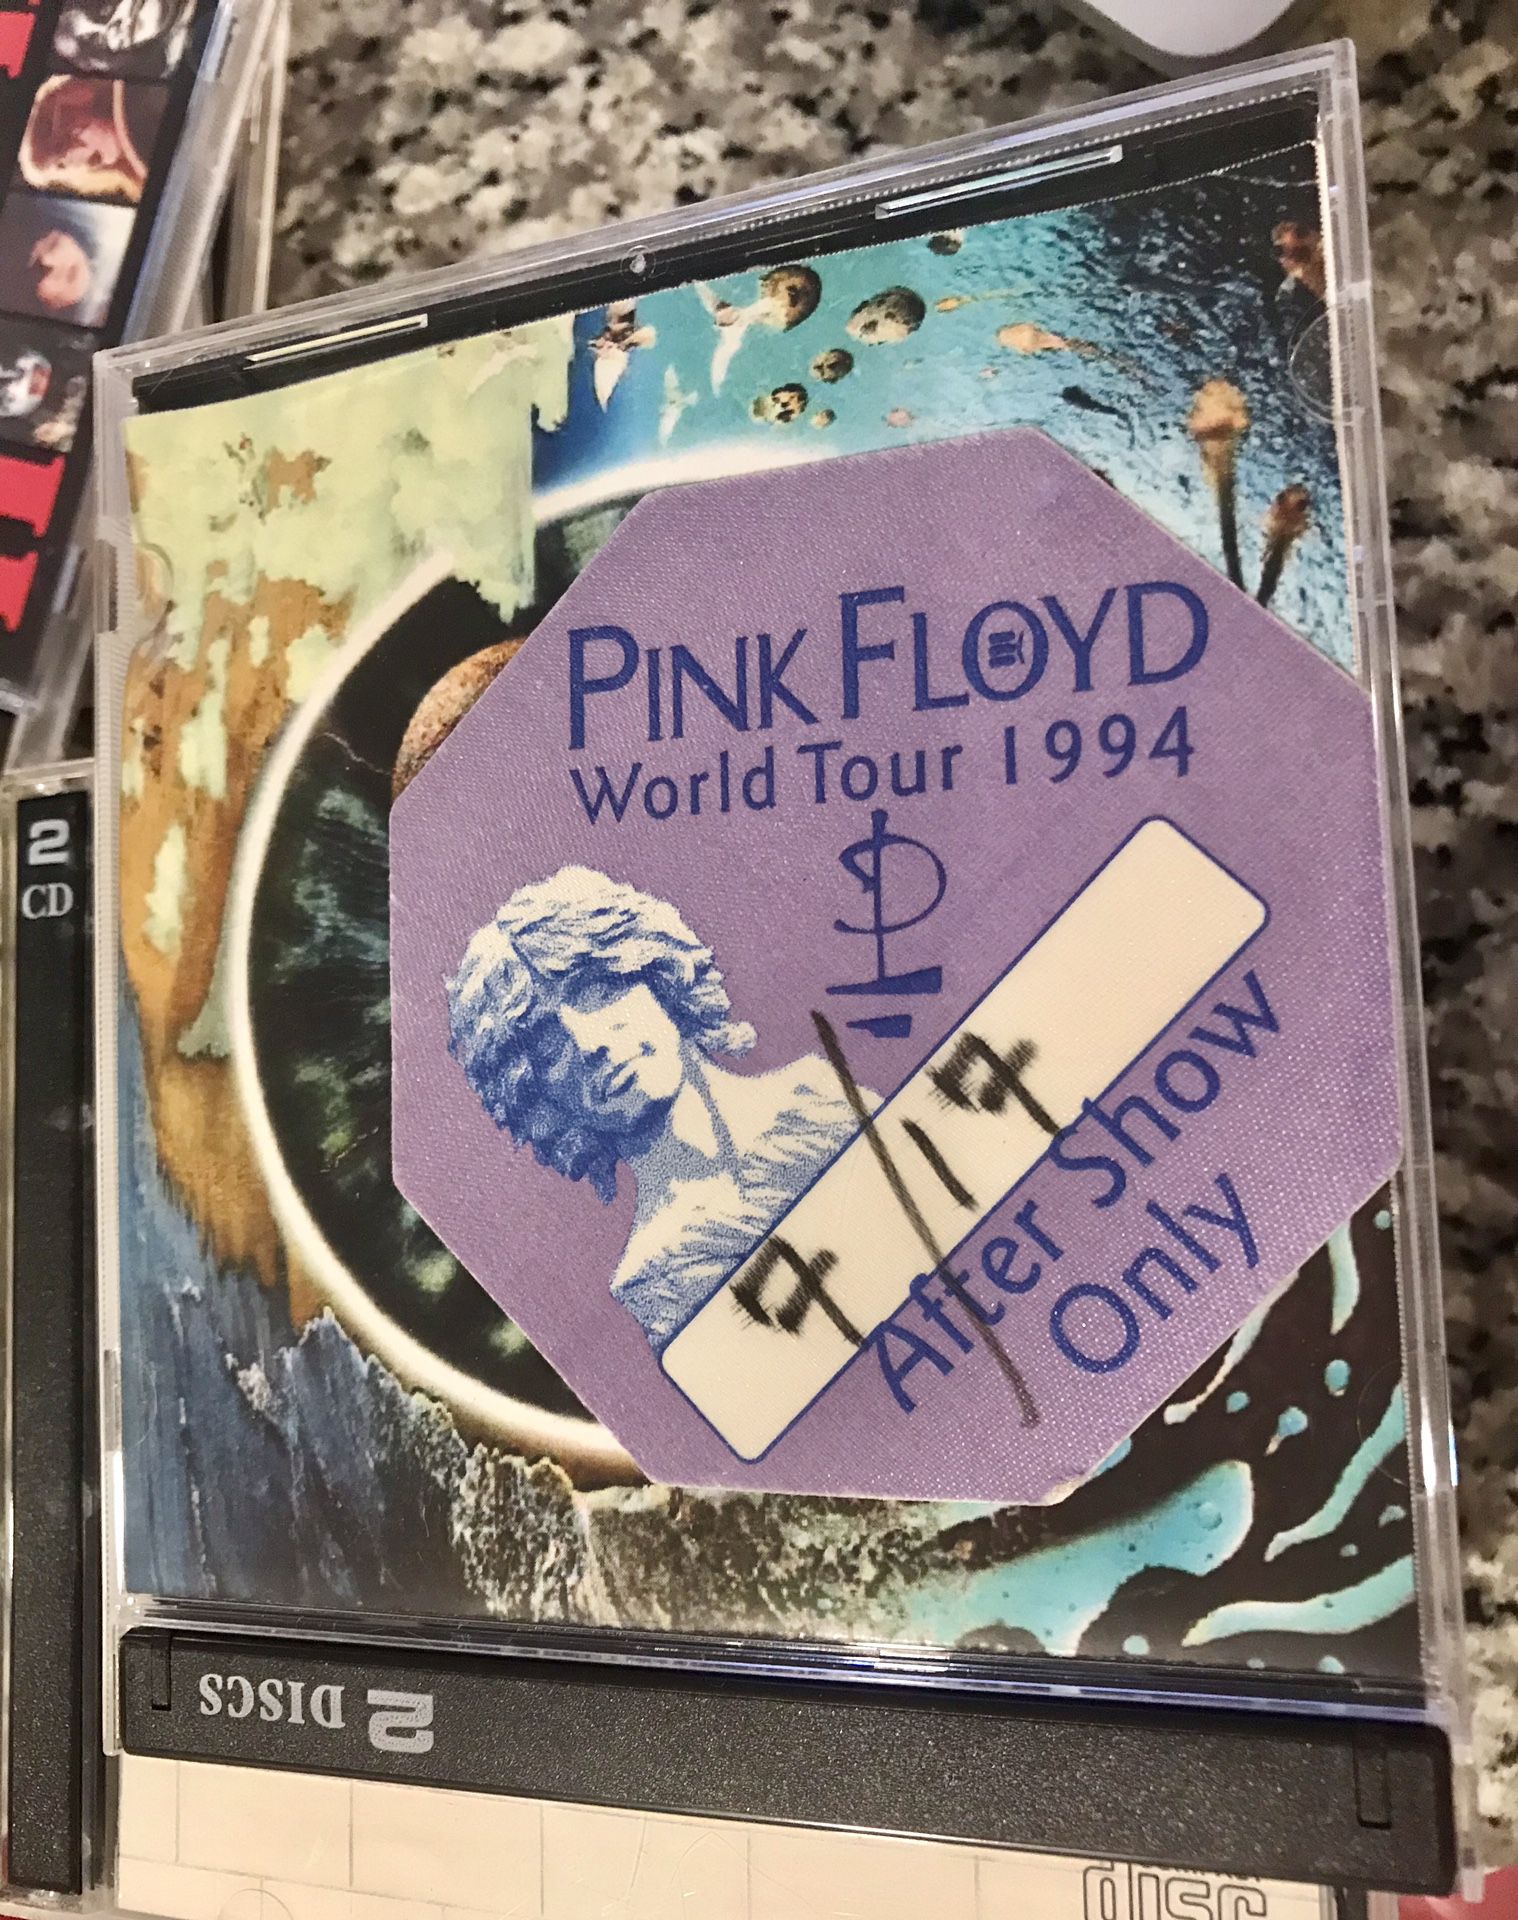 Pink Floyd 15 great condition CDs, a backstage pass, and rare CG the final cut a two disc set